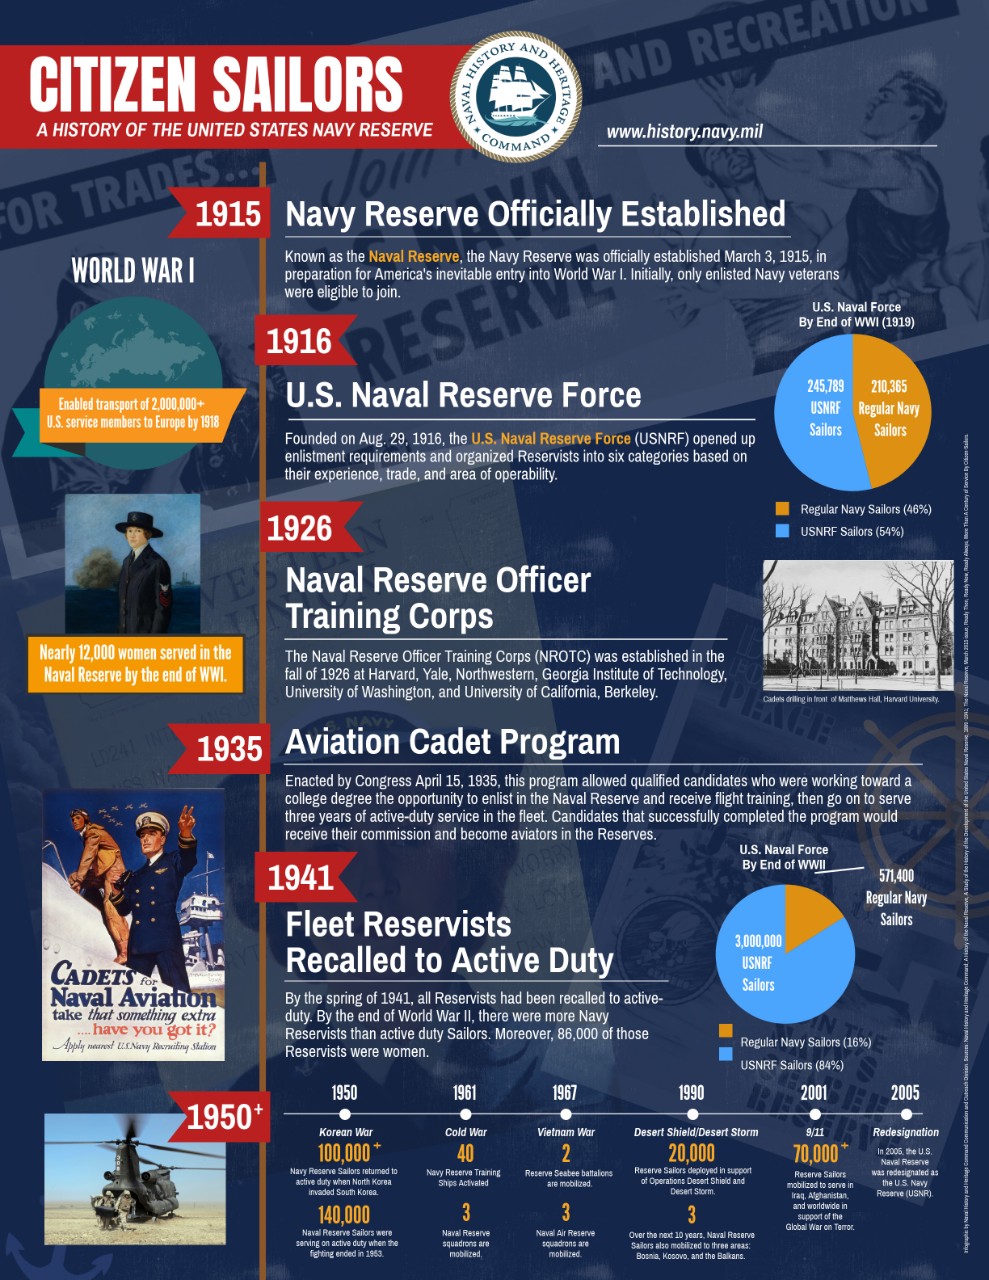 History of the U.S. Navy Reserve